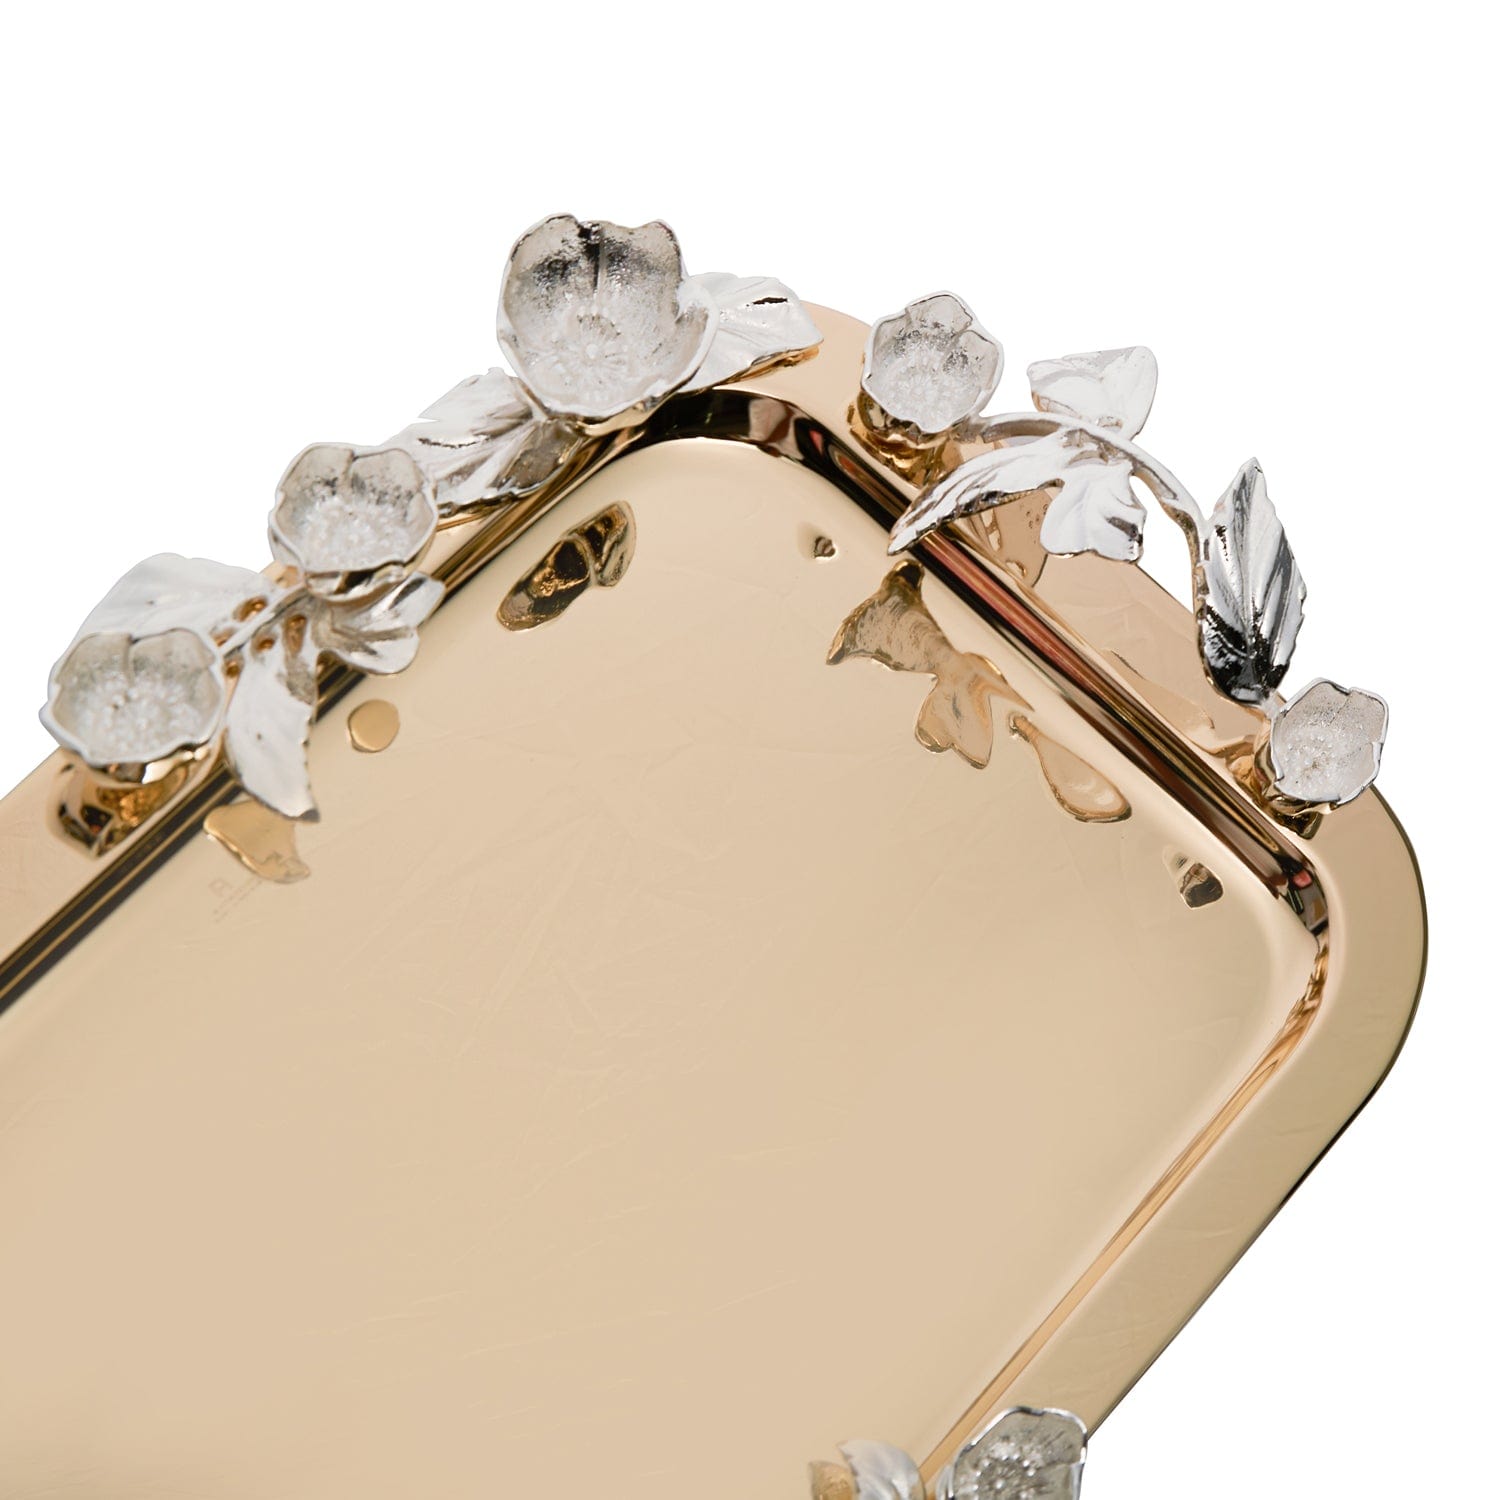 Pantazelos 4 Seasons Of Blossoms Goldplated and Silverplated Rectangular Large Tray - 5545/GPSP